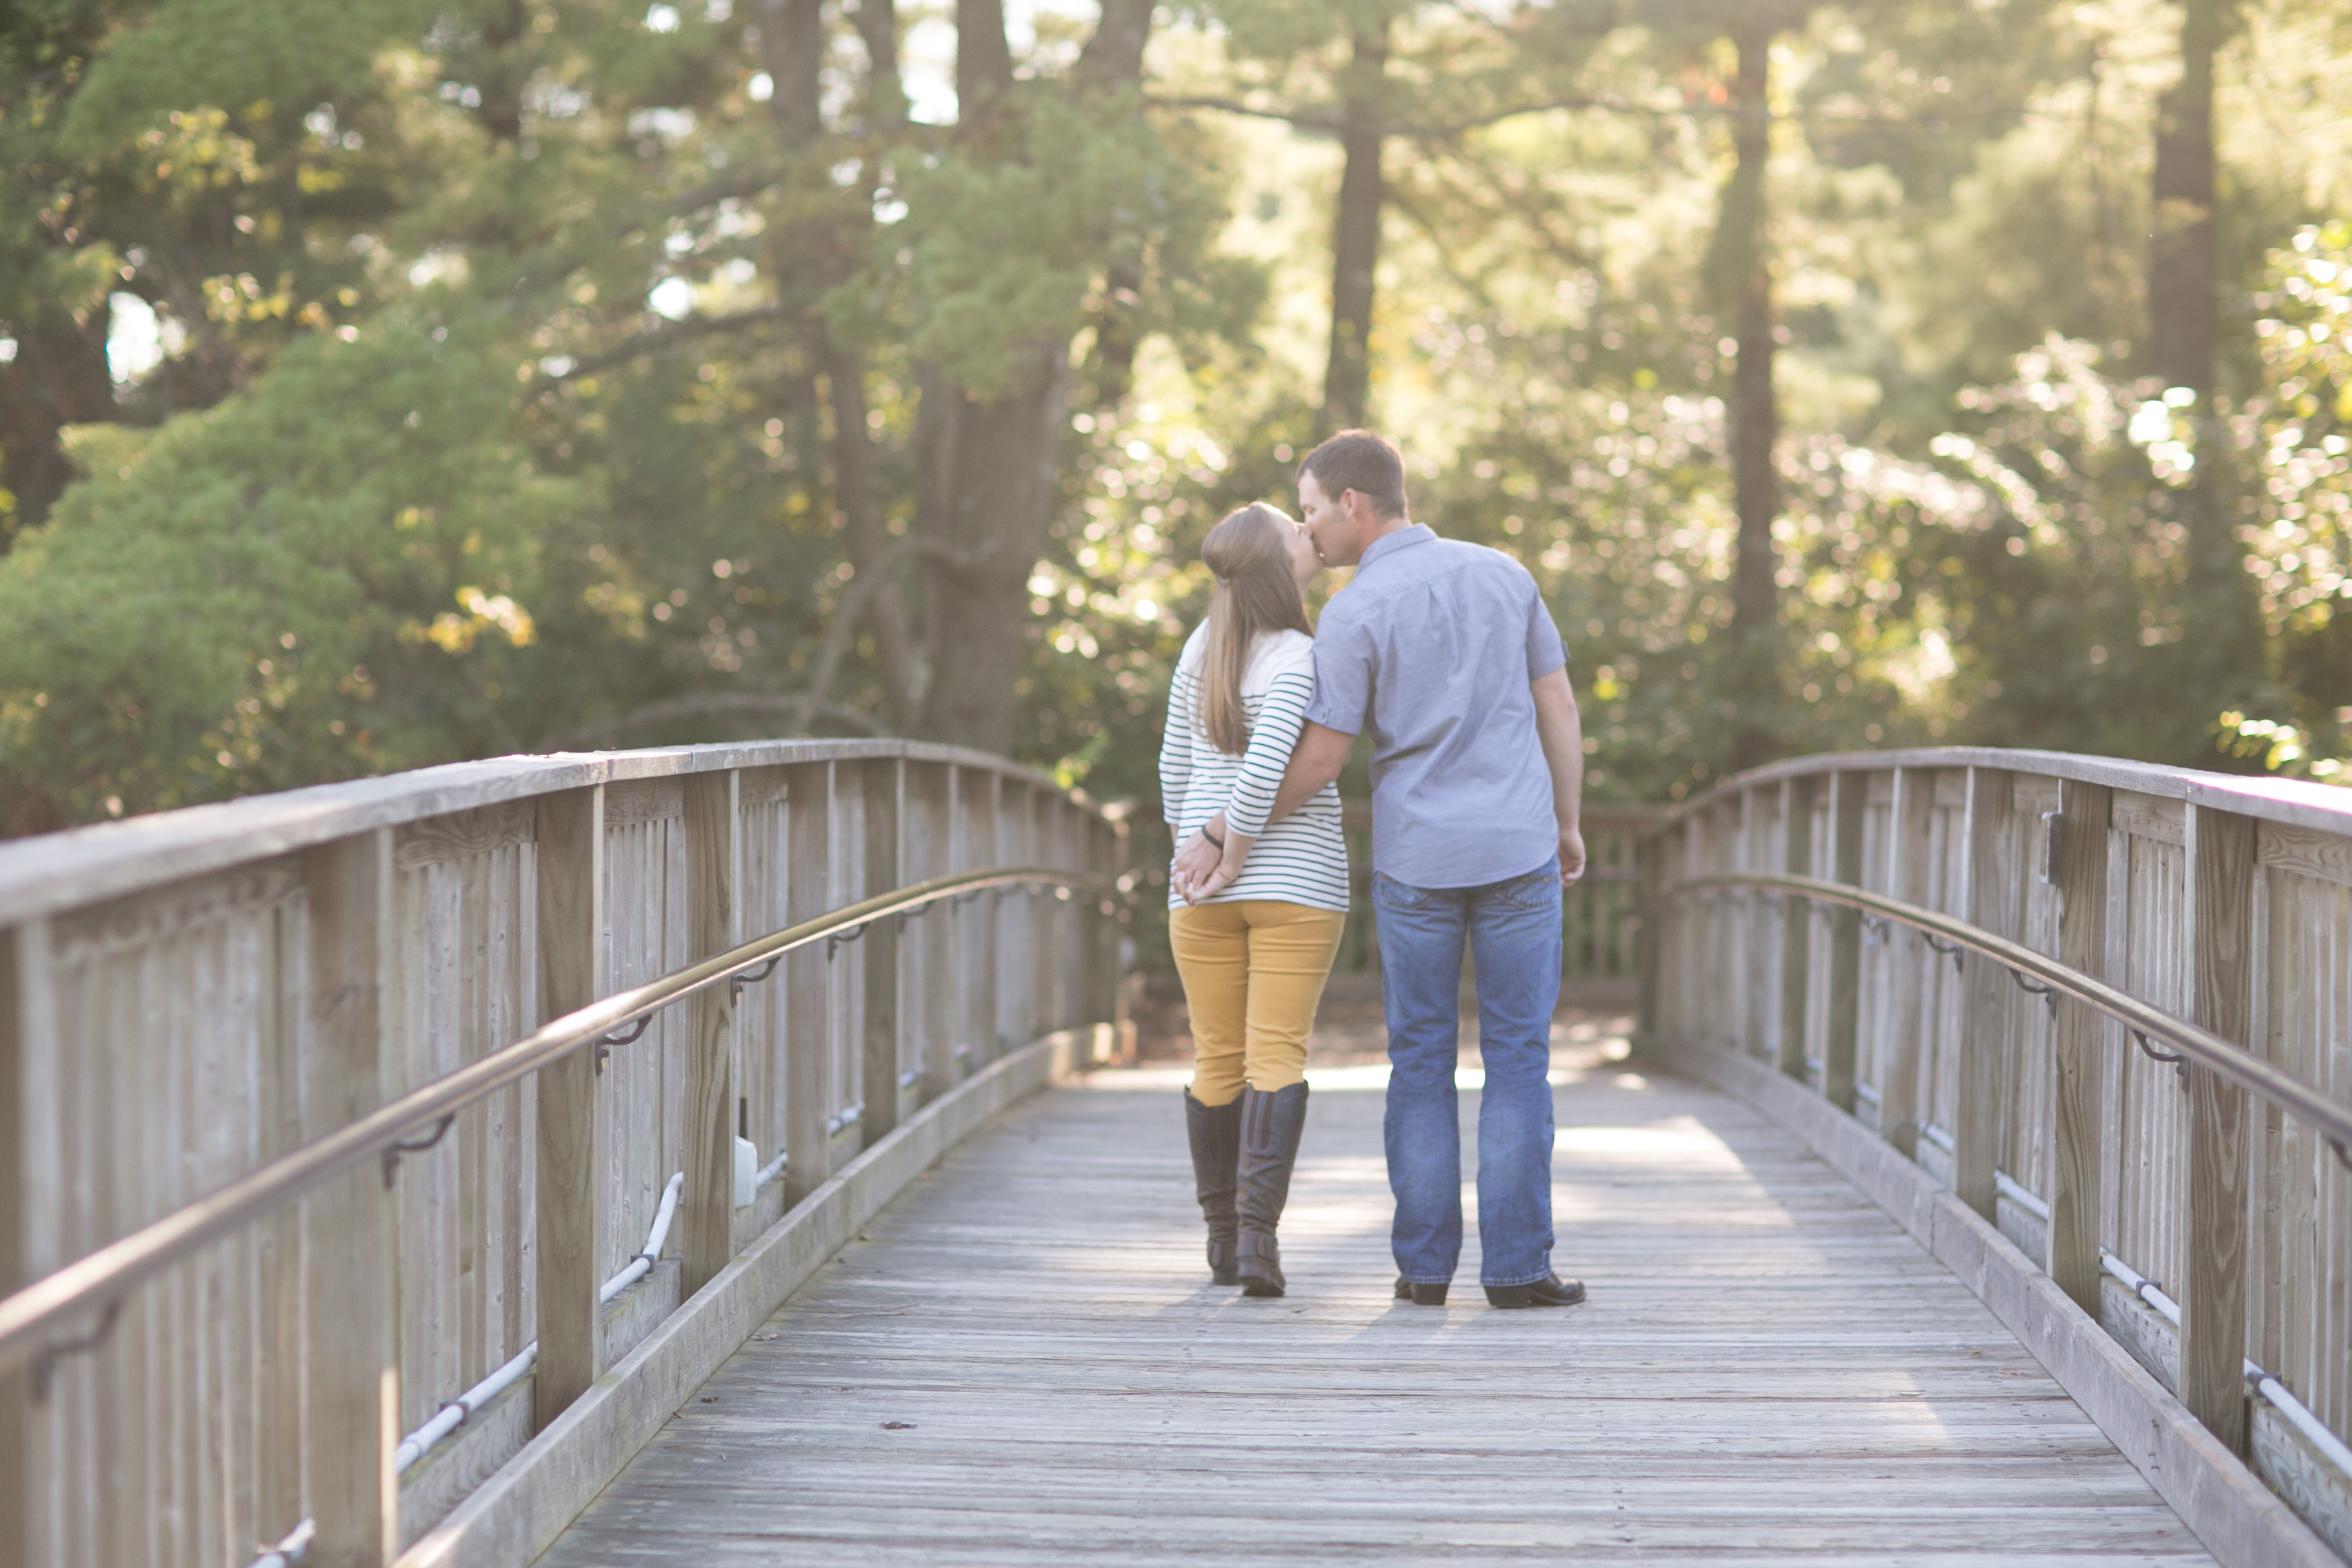 Kenna and Corey Engagement Session at SIUE Gardens by Jackelynn Noel Photography